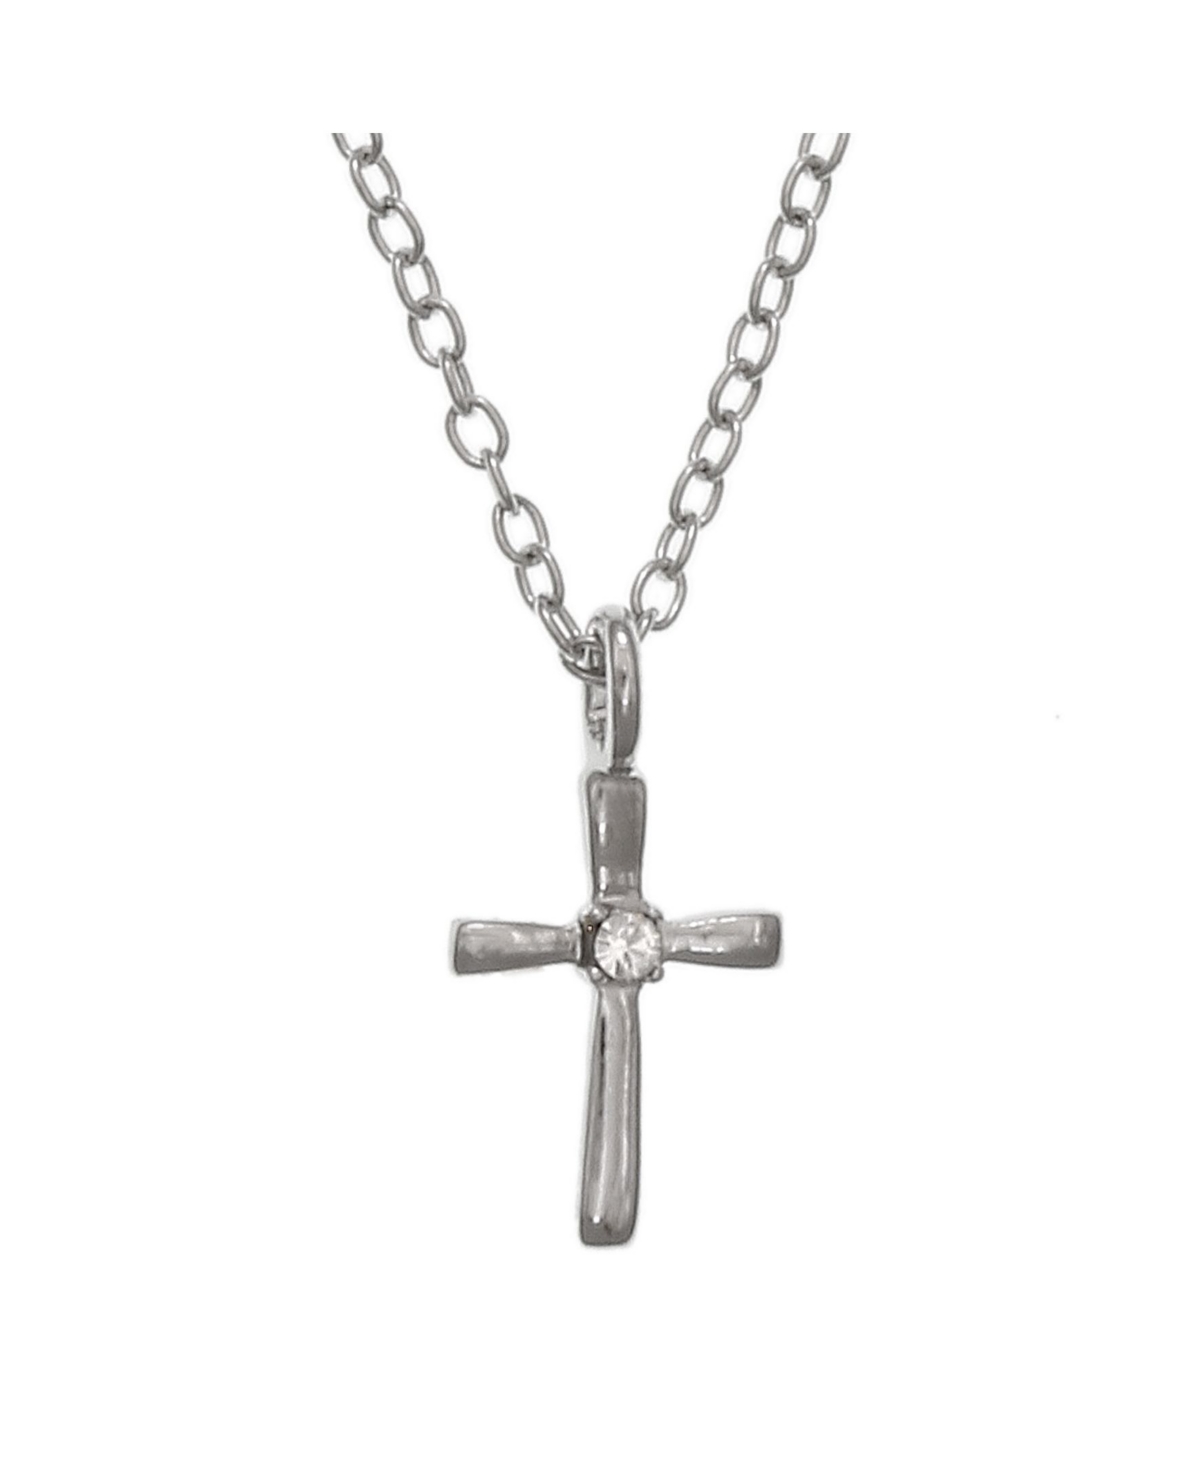 Fao Schwarz Women's Sterling Silver Cross Pendant Necklace with Crystal Stone Accent